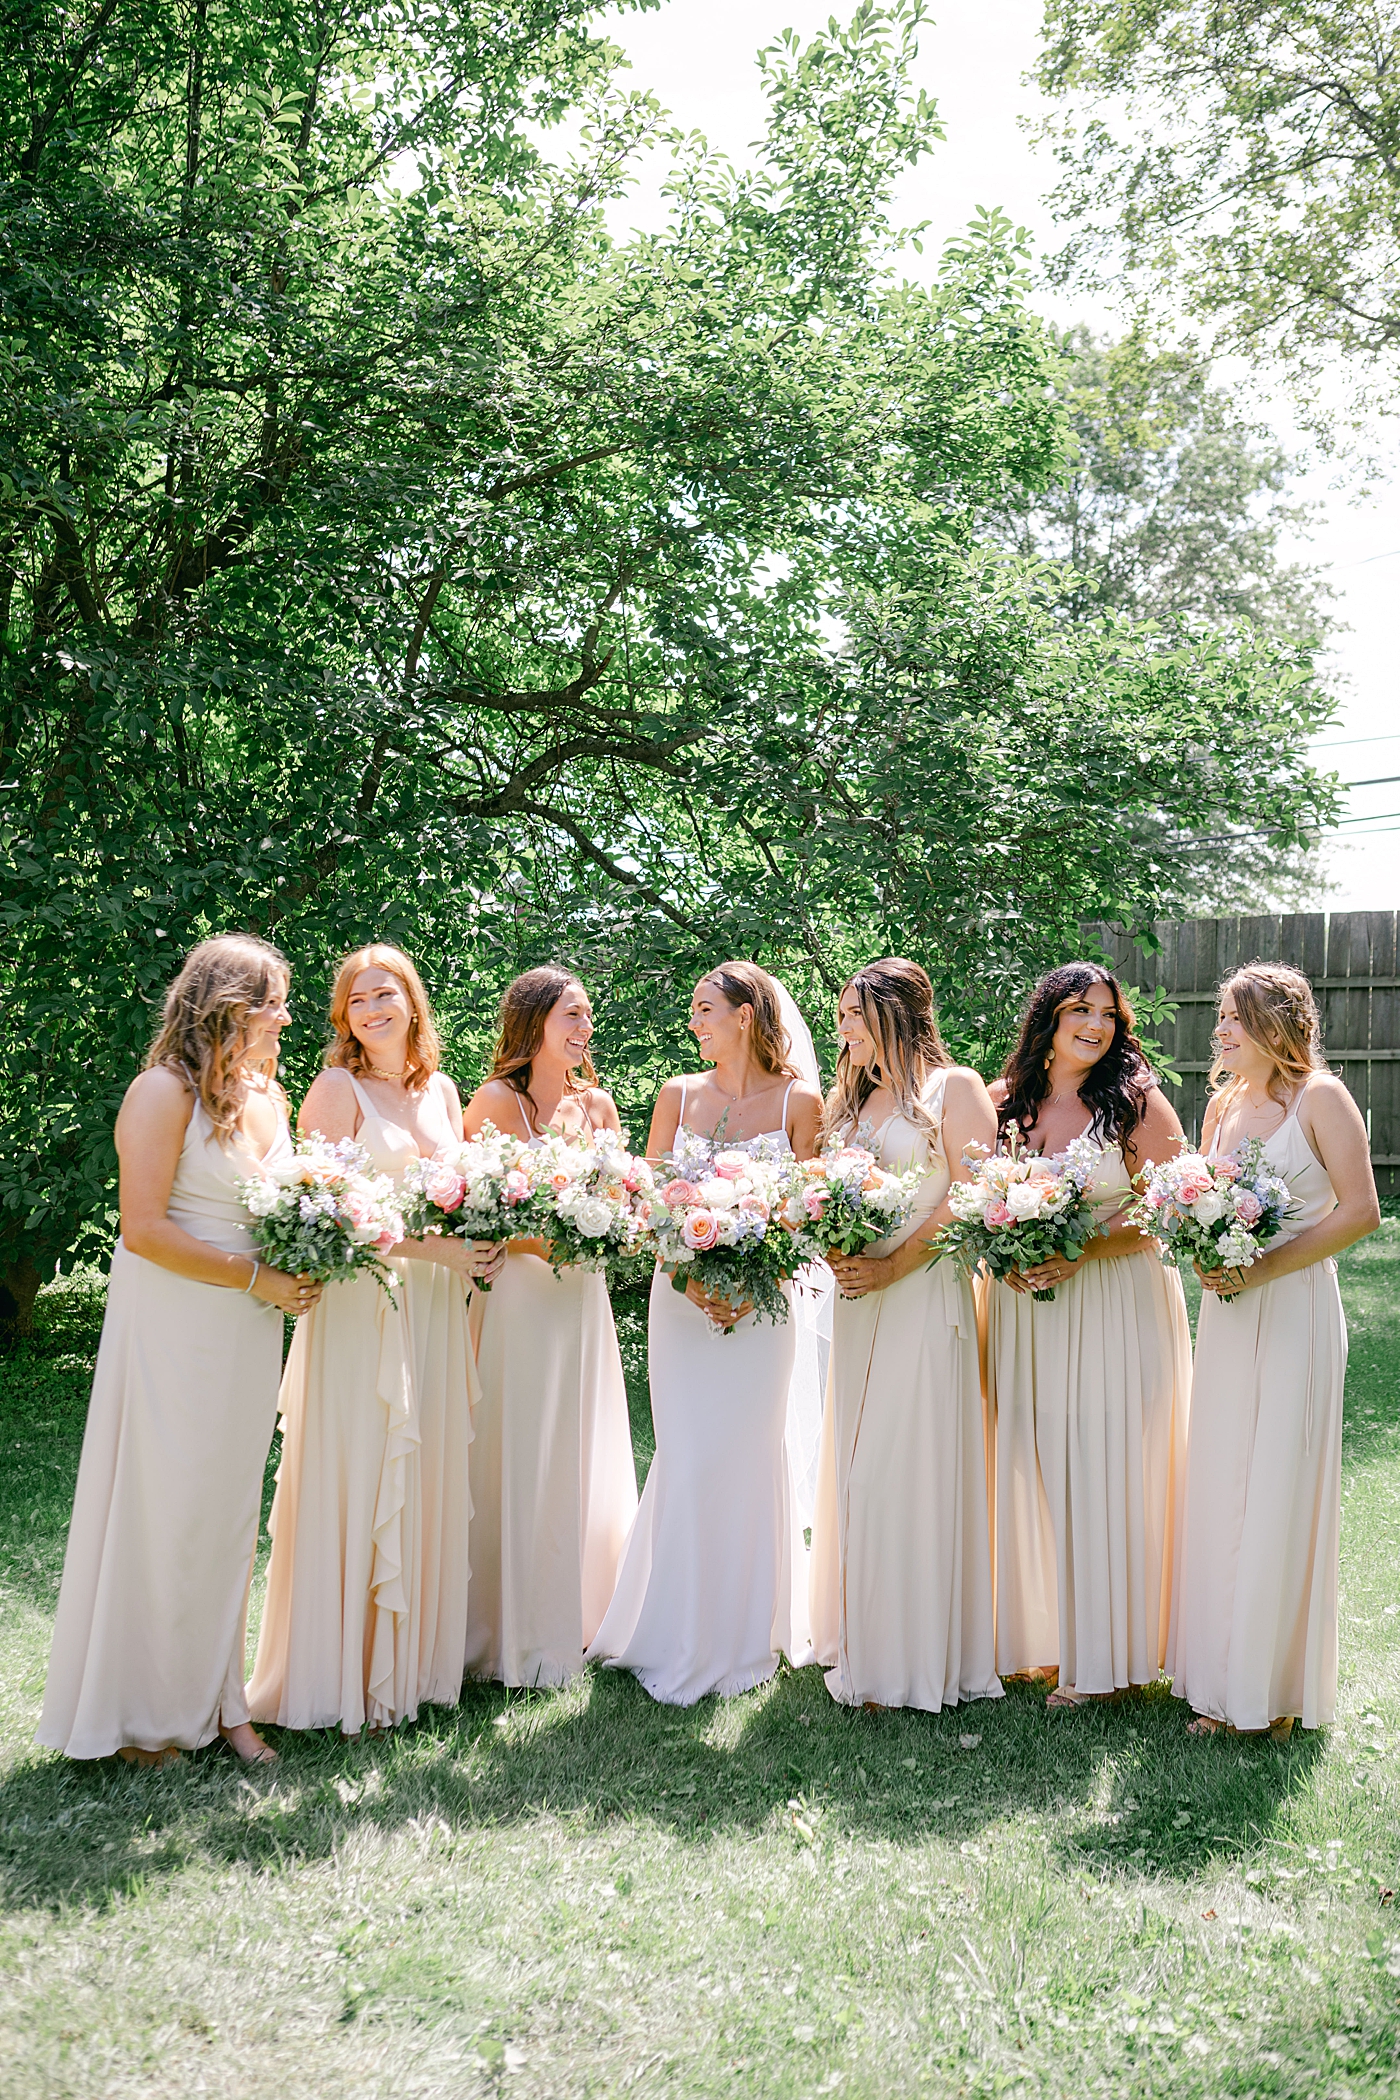 Bride standing with her bridesmaids | Image by Hudson Valley Wedding Photographer Hope Helmuth